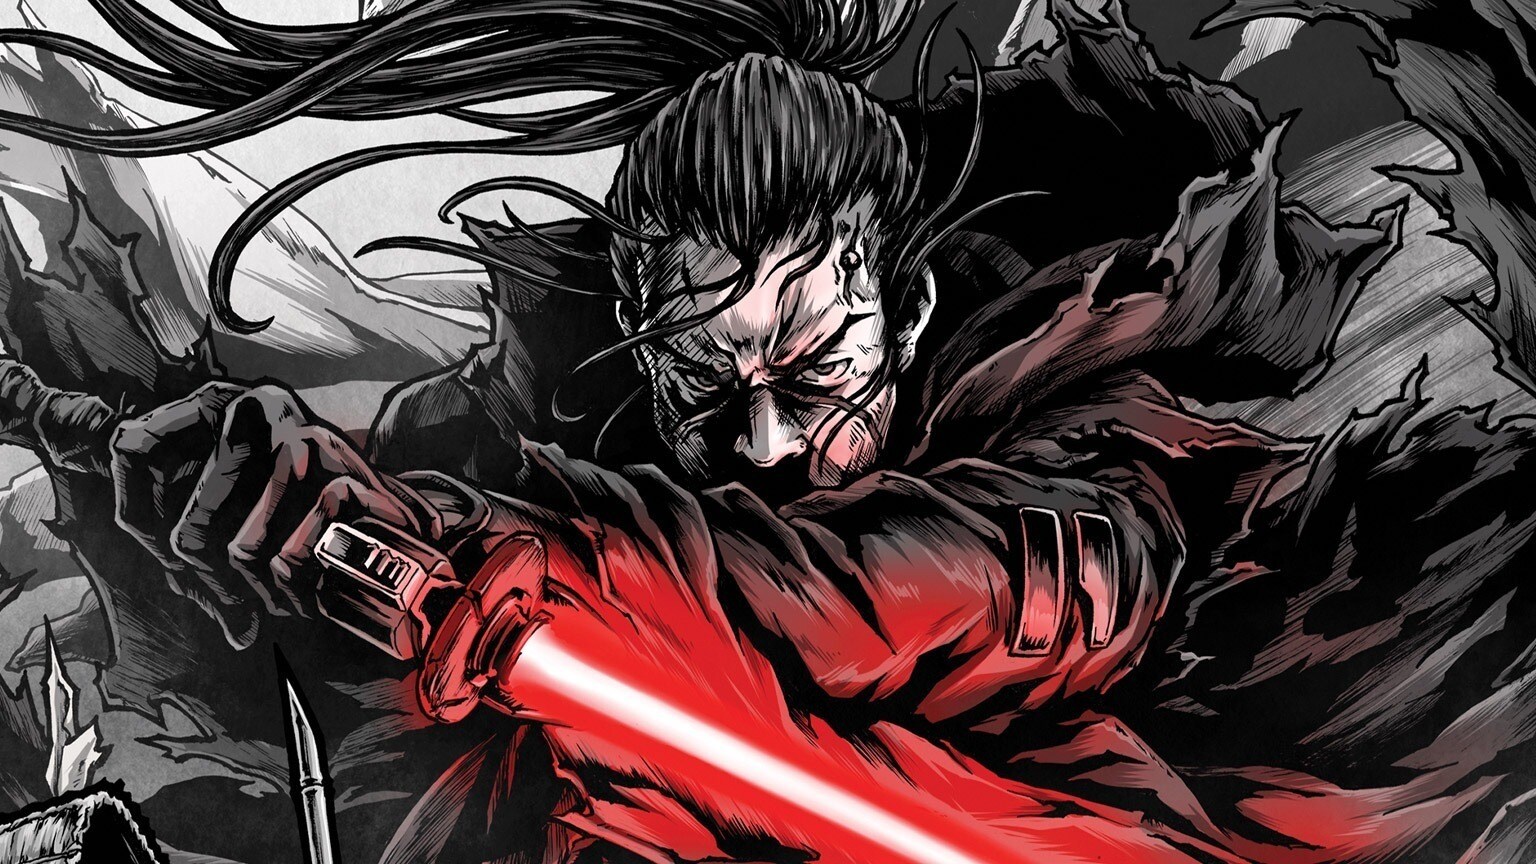 The Ronin Strikes Back in Marvel’s Star Wars: Visions #1 - Exclusive Preview